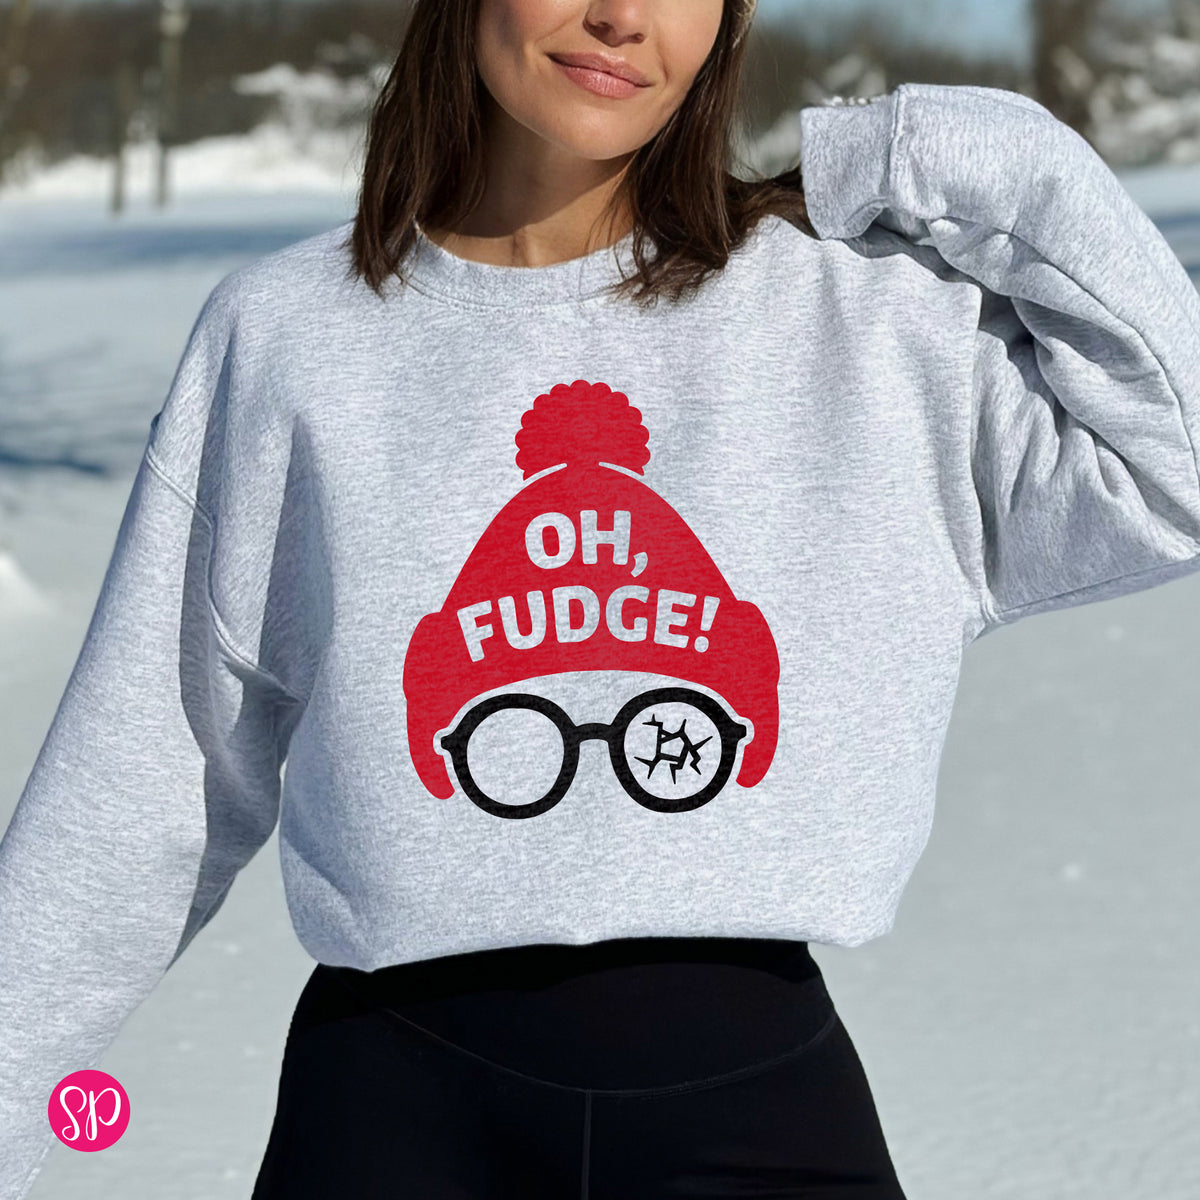 Oh Fudge A Christmas Story You'll Shoot Your Eye Out Movie Broken Glasses Cozy Winter Holiday Sweatshirt